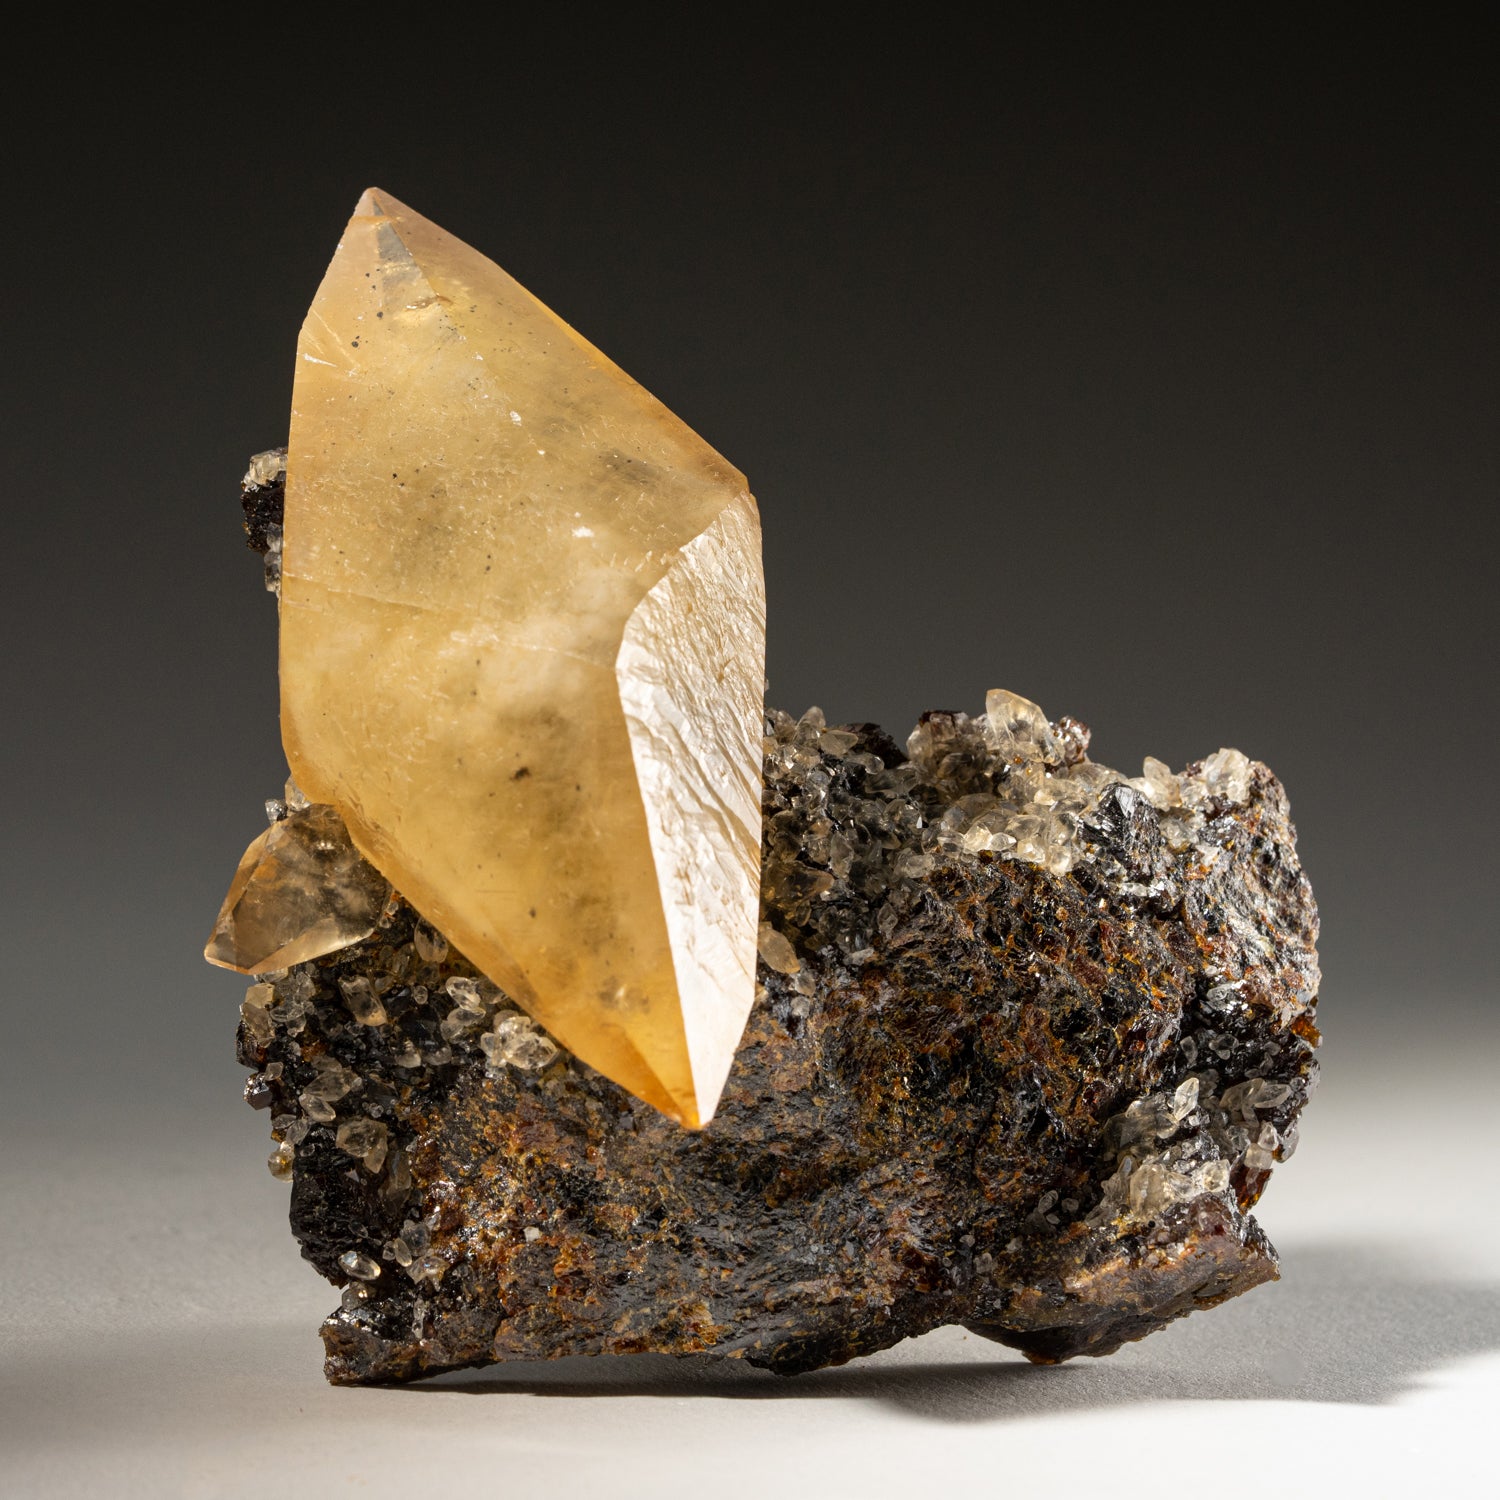 Twinned Golden Calcite Crystal from Elmwood Mine, Tennessee (211.4 grams)